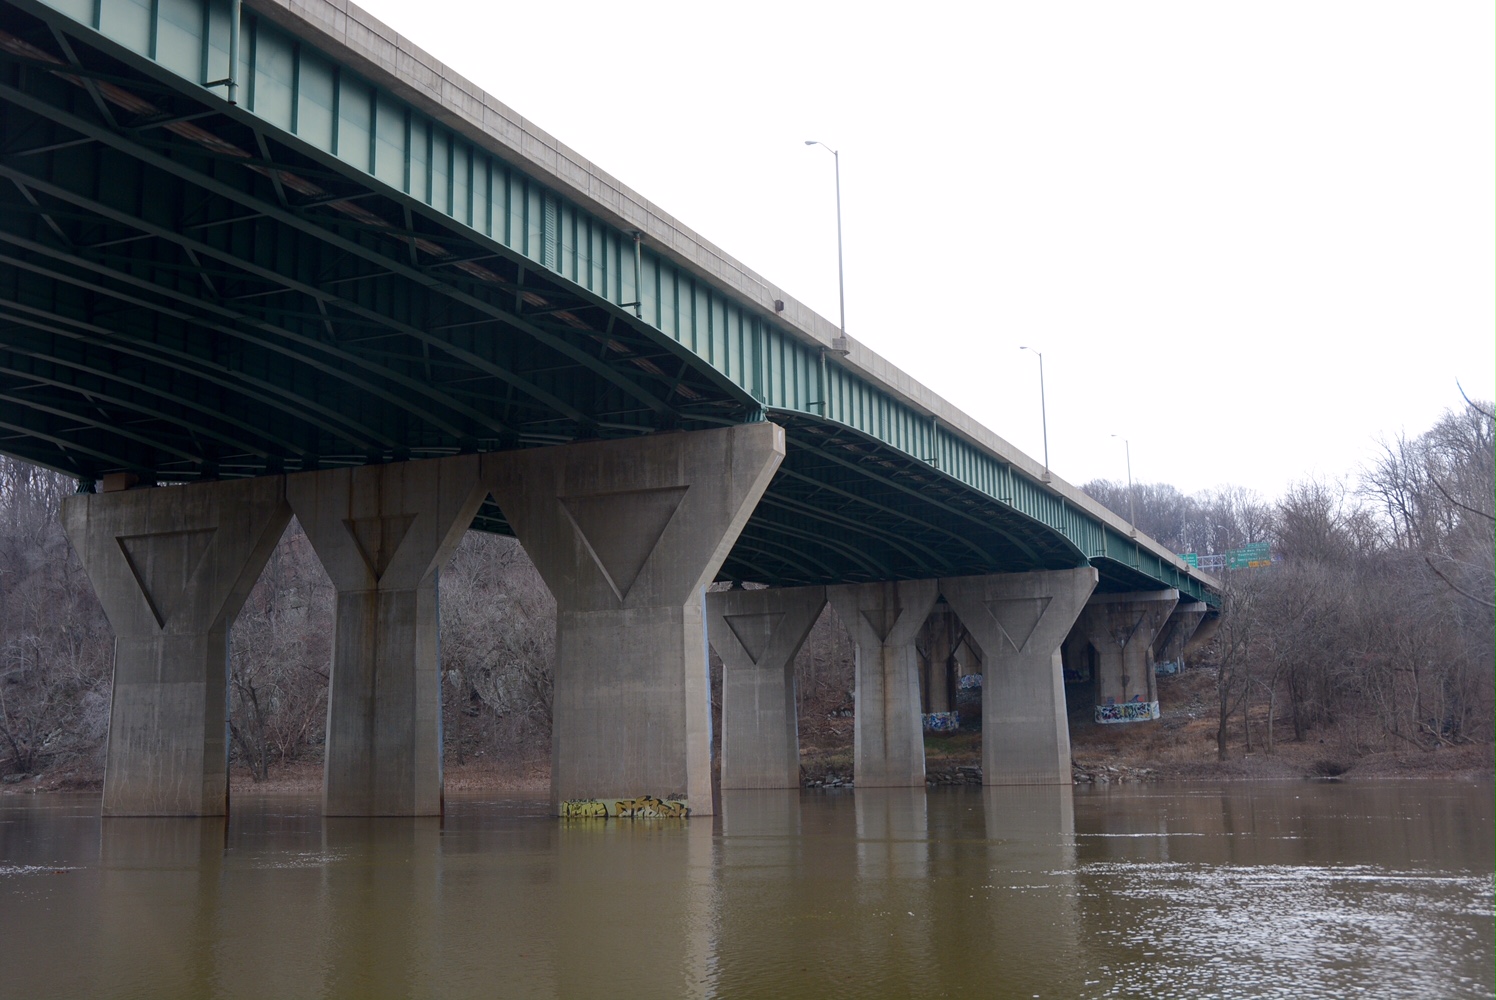 The American Legion Bridge opened to traffic in 1962. The bridge has spanned for Potomac River for over a half century. (WTOP/Dave Dildine)